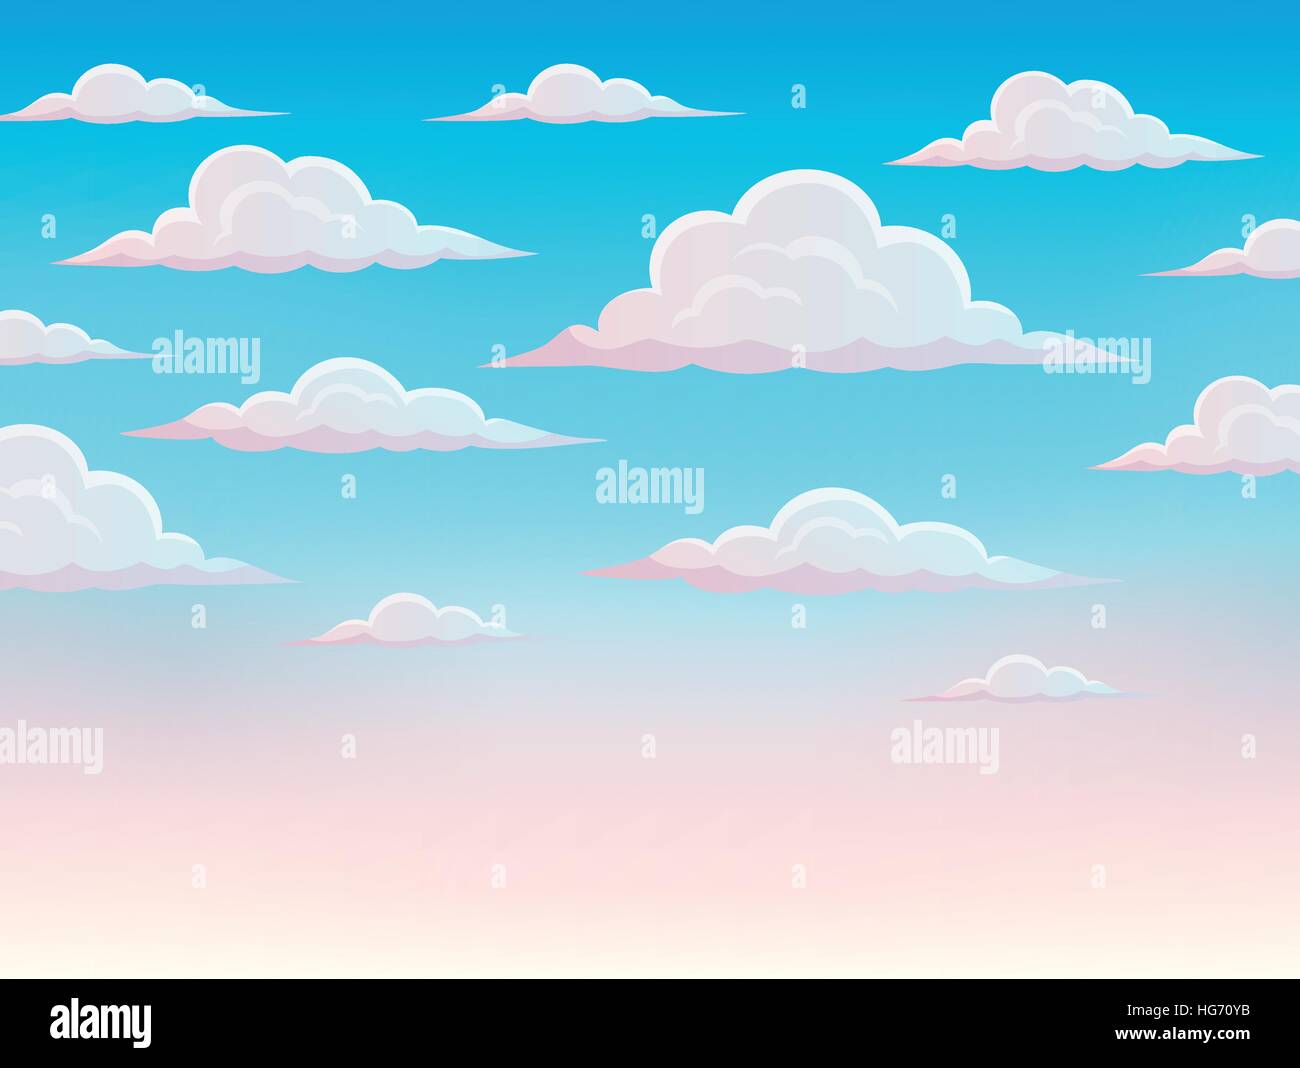 Pink sky theme background 1 - eps10 vector illustration. Stock Vector